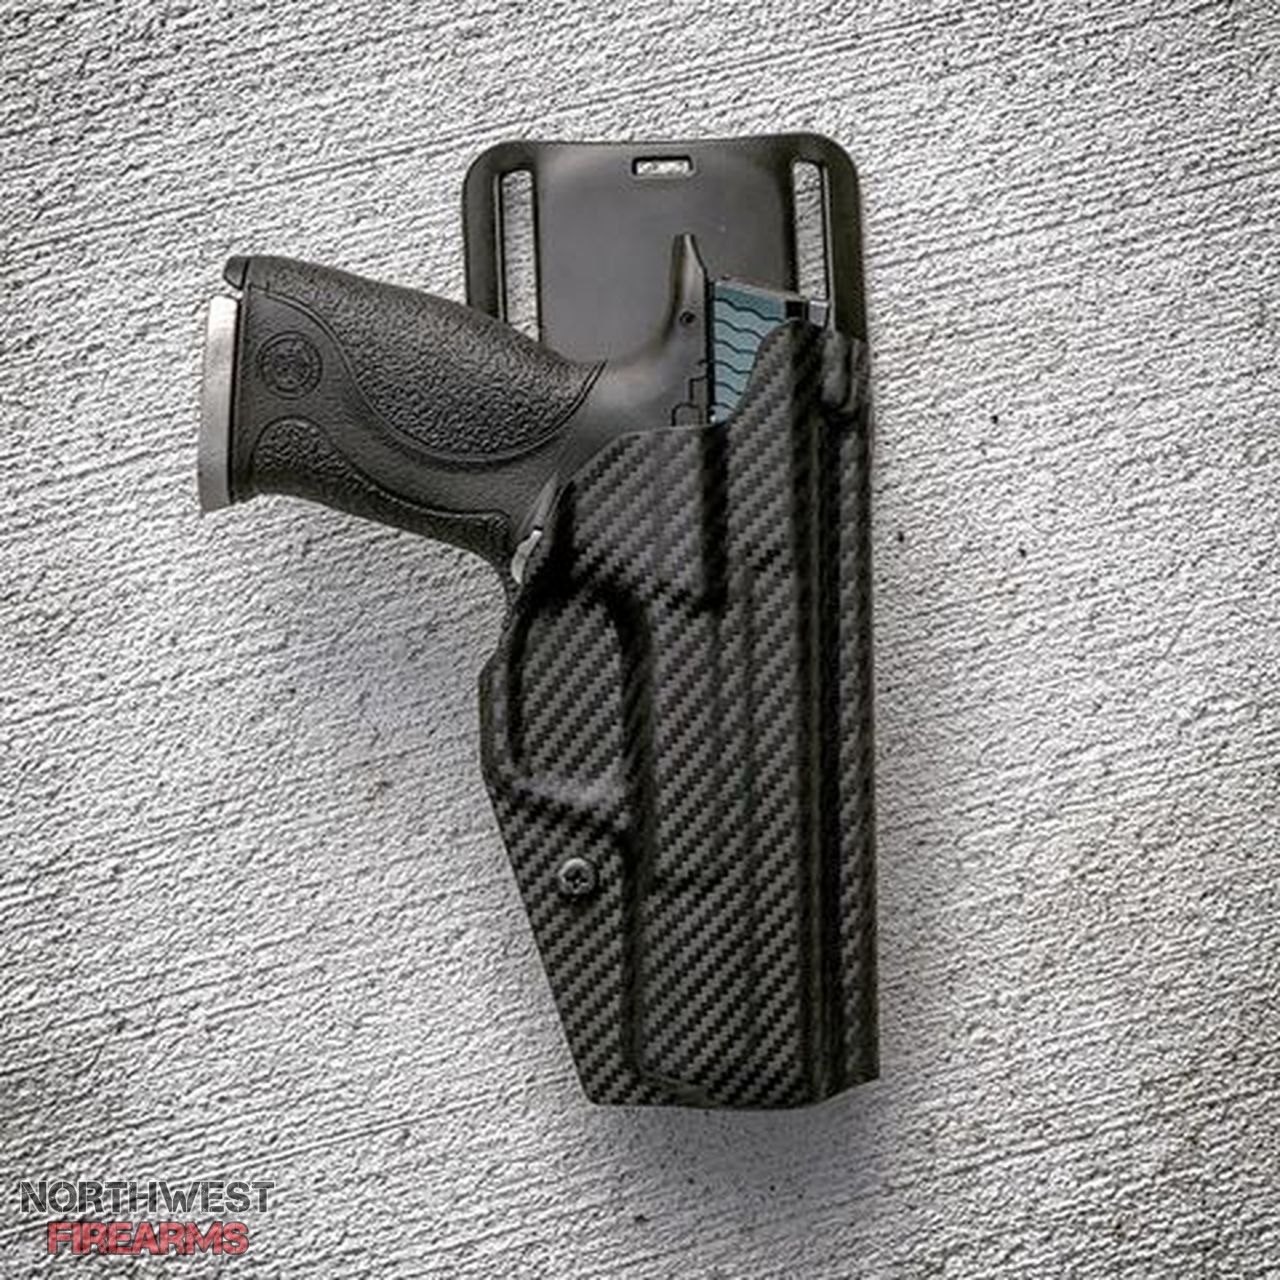 New Drop Offset Holster with Thigh Strap - DARA HOLSTERS & GEAR